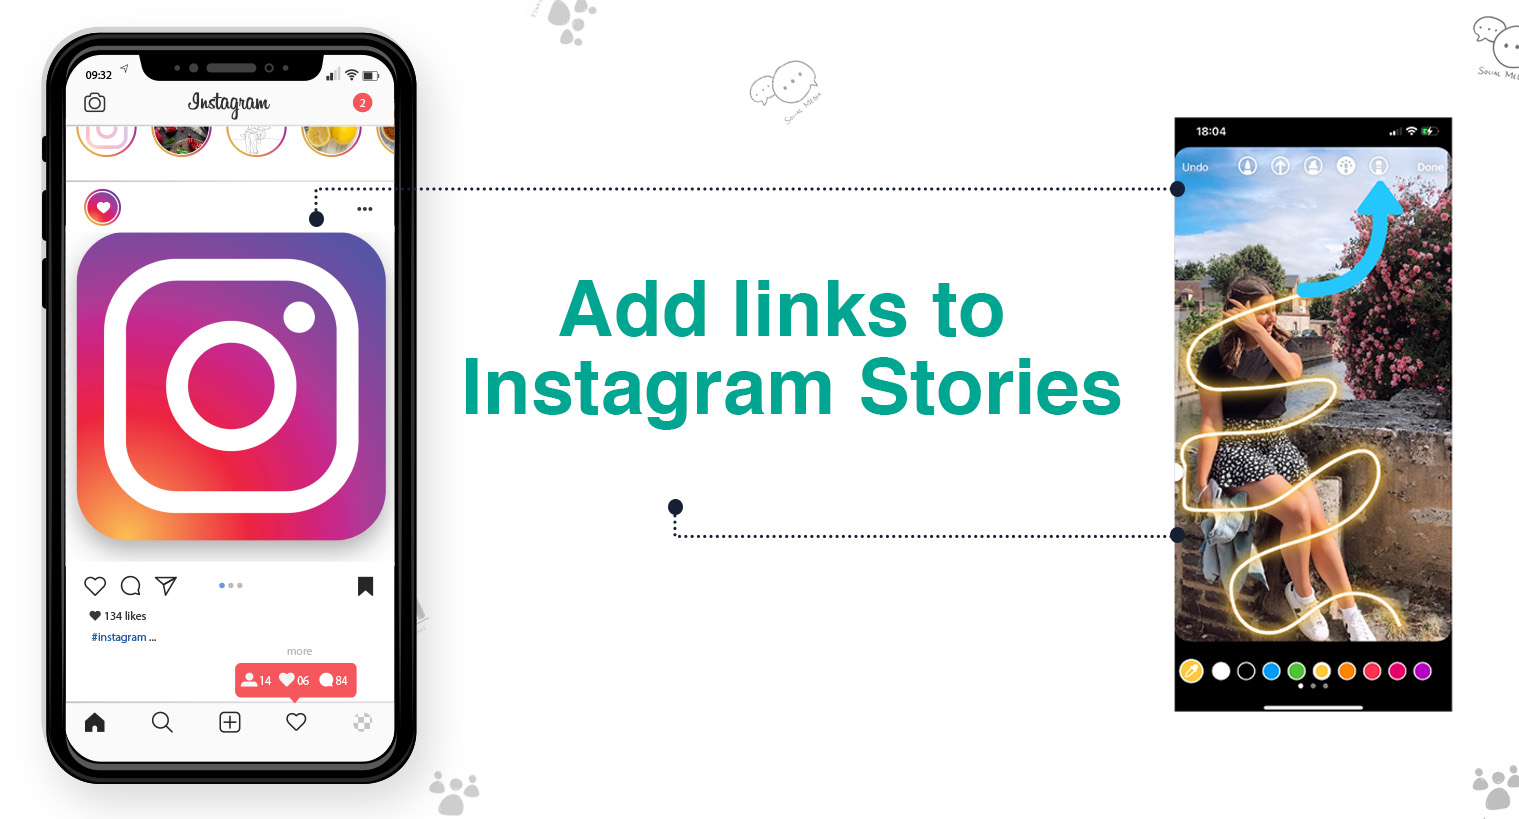 Learn How to Add Links to Instagram Stories - Silverpush